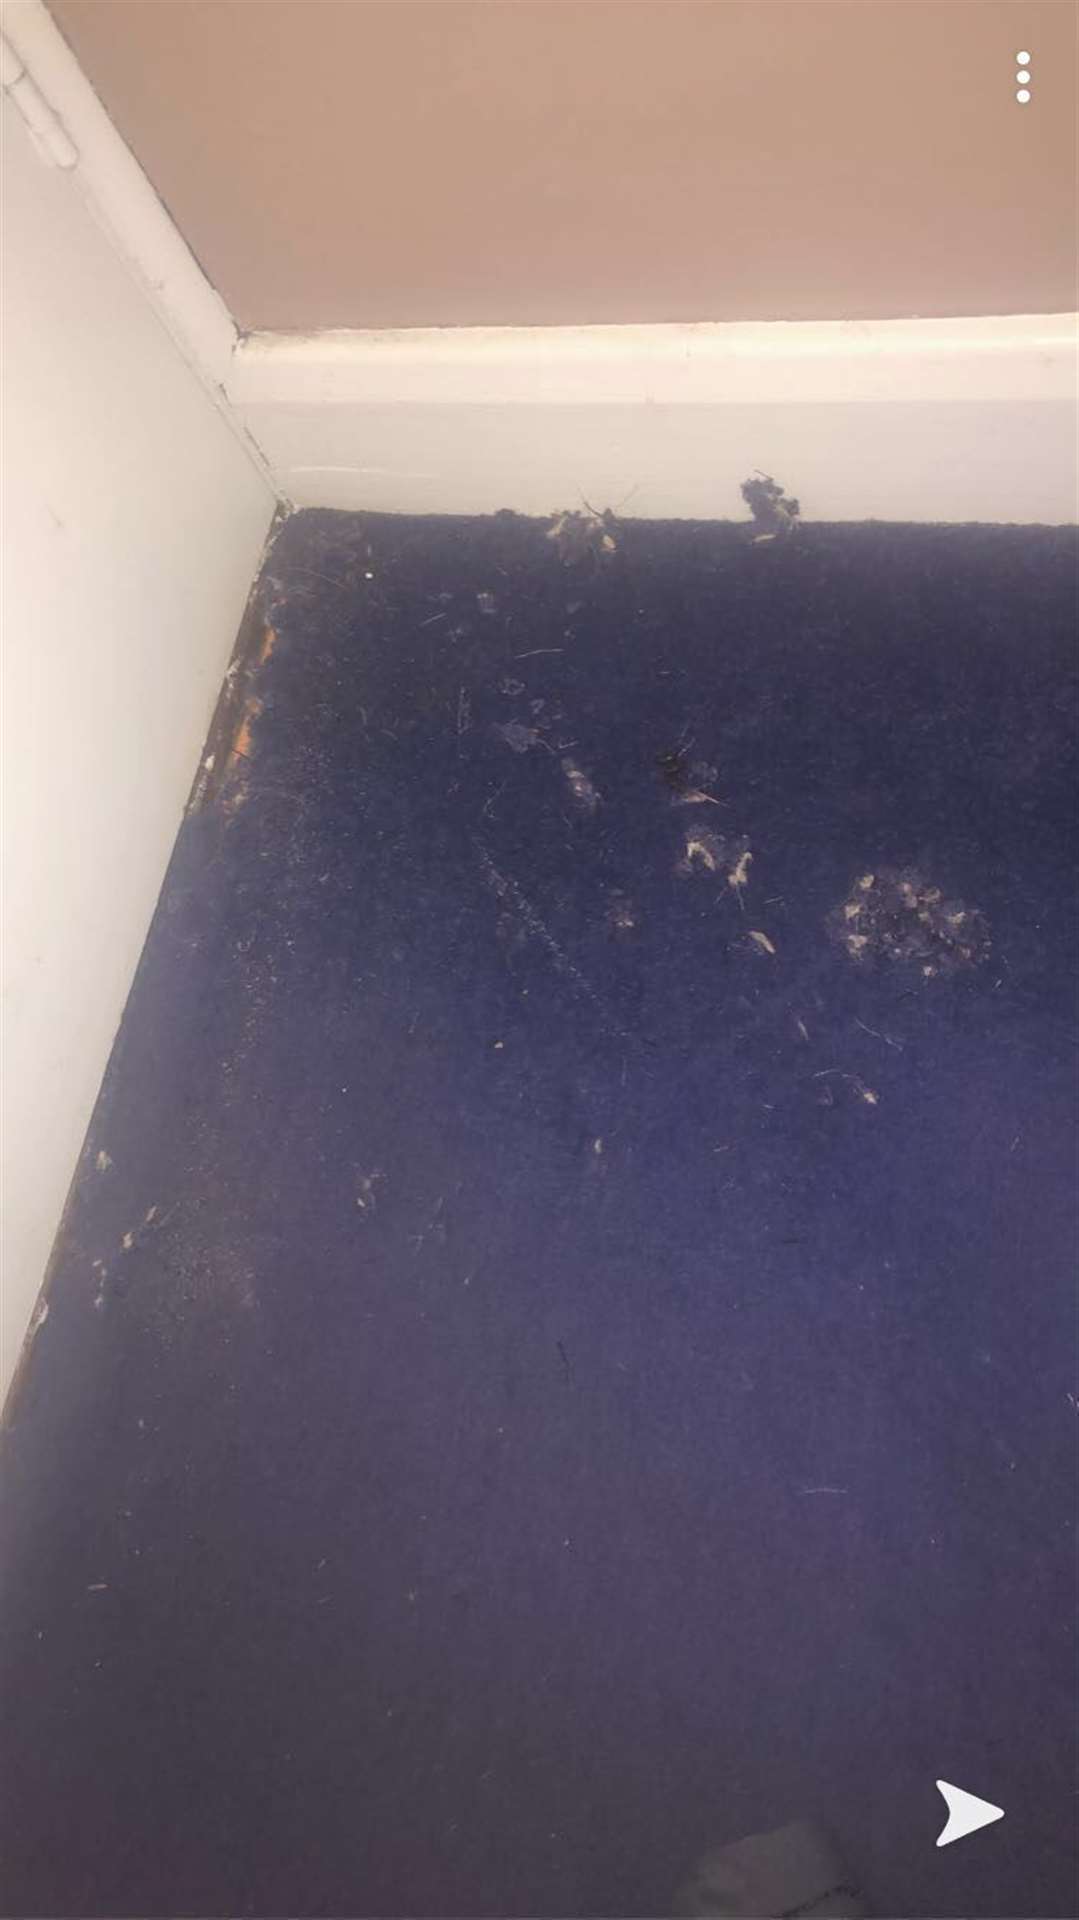 The rat has damaged carpets and clothes in the family home, forcing the woman to close off a bedroom